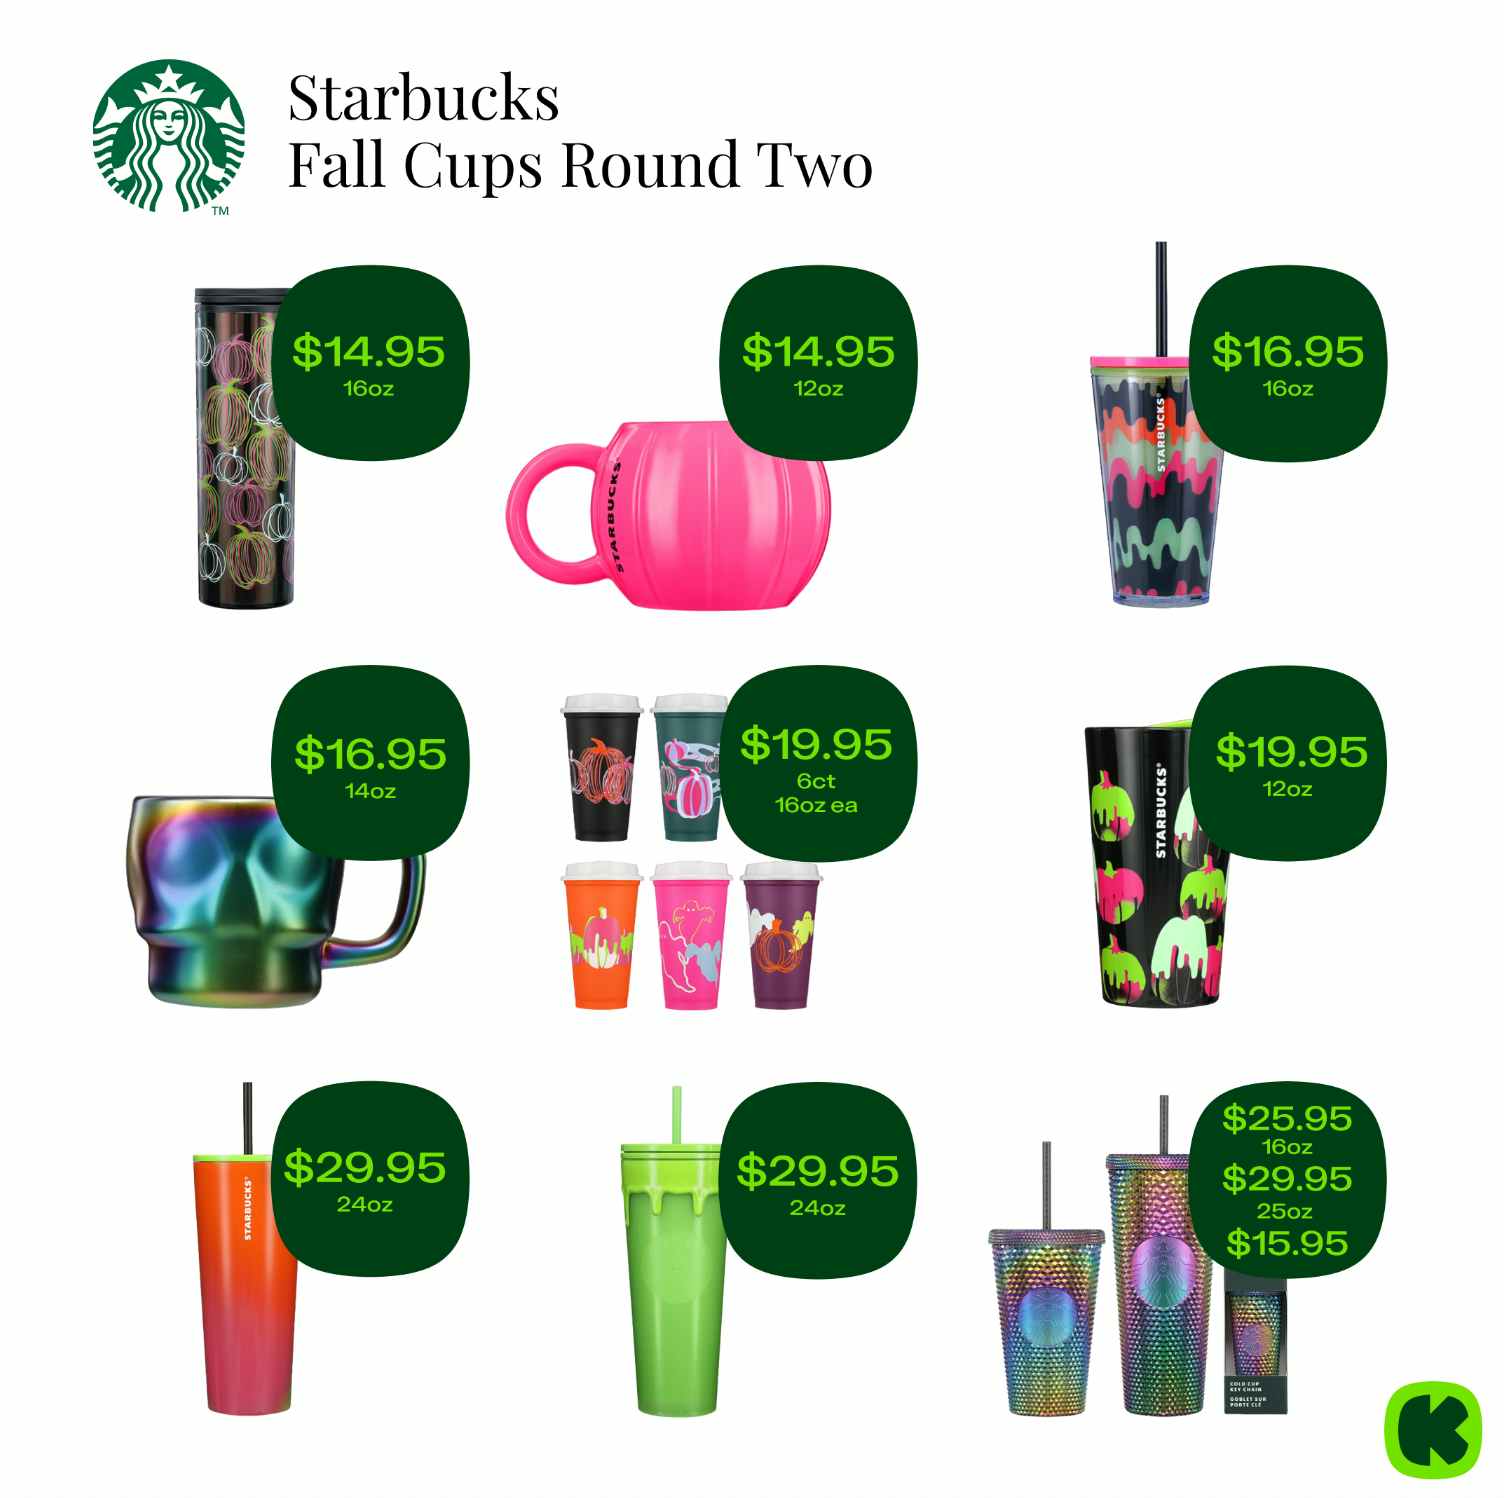 A graphic of the Starbucks Fall Cups from the second round of releases